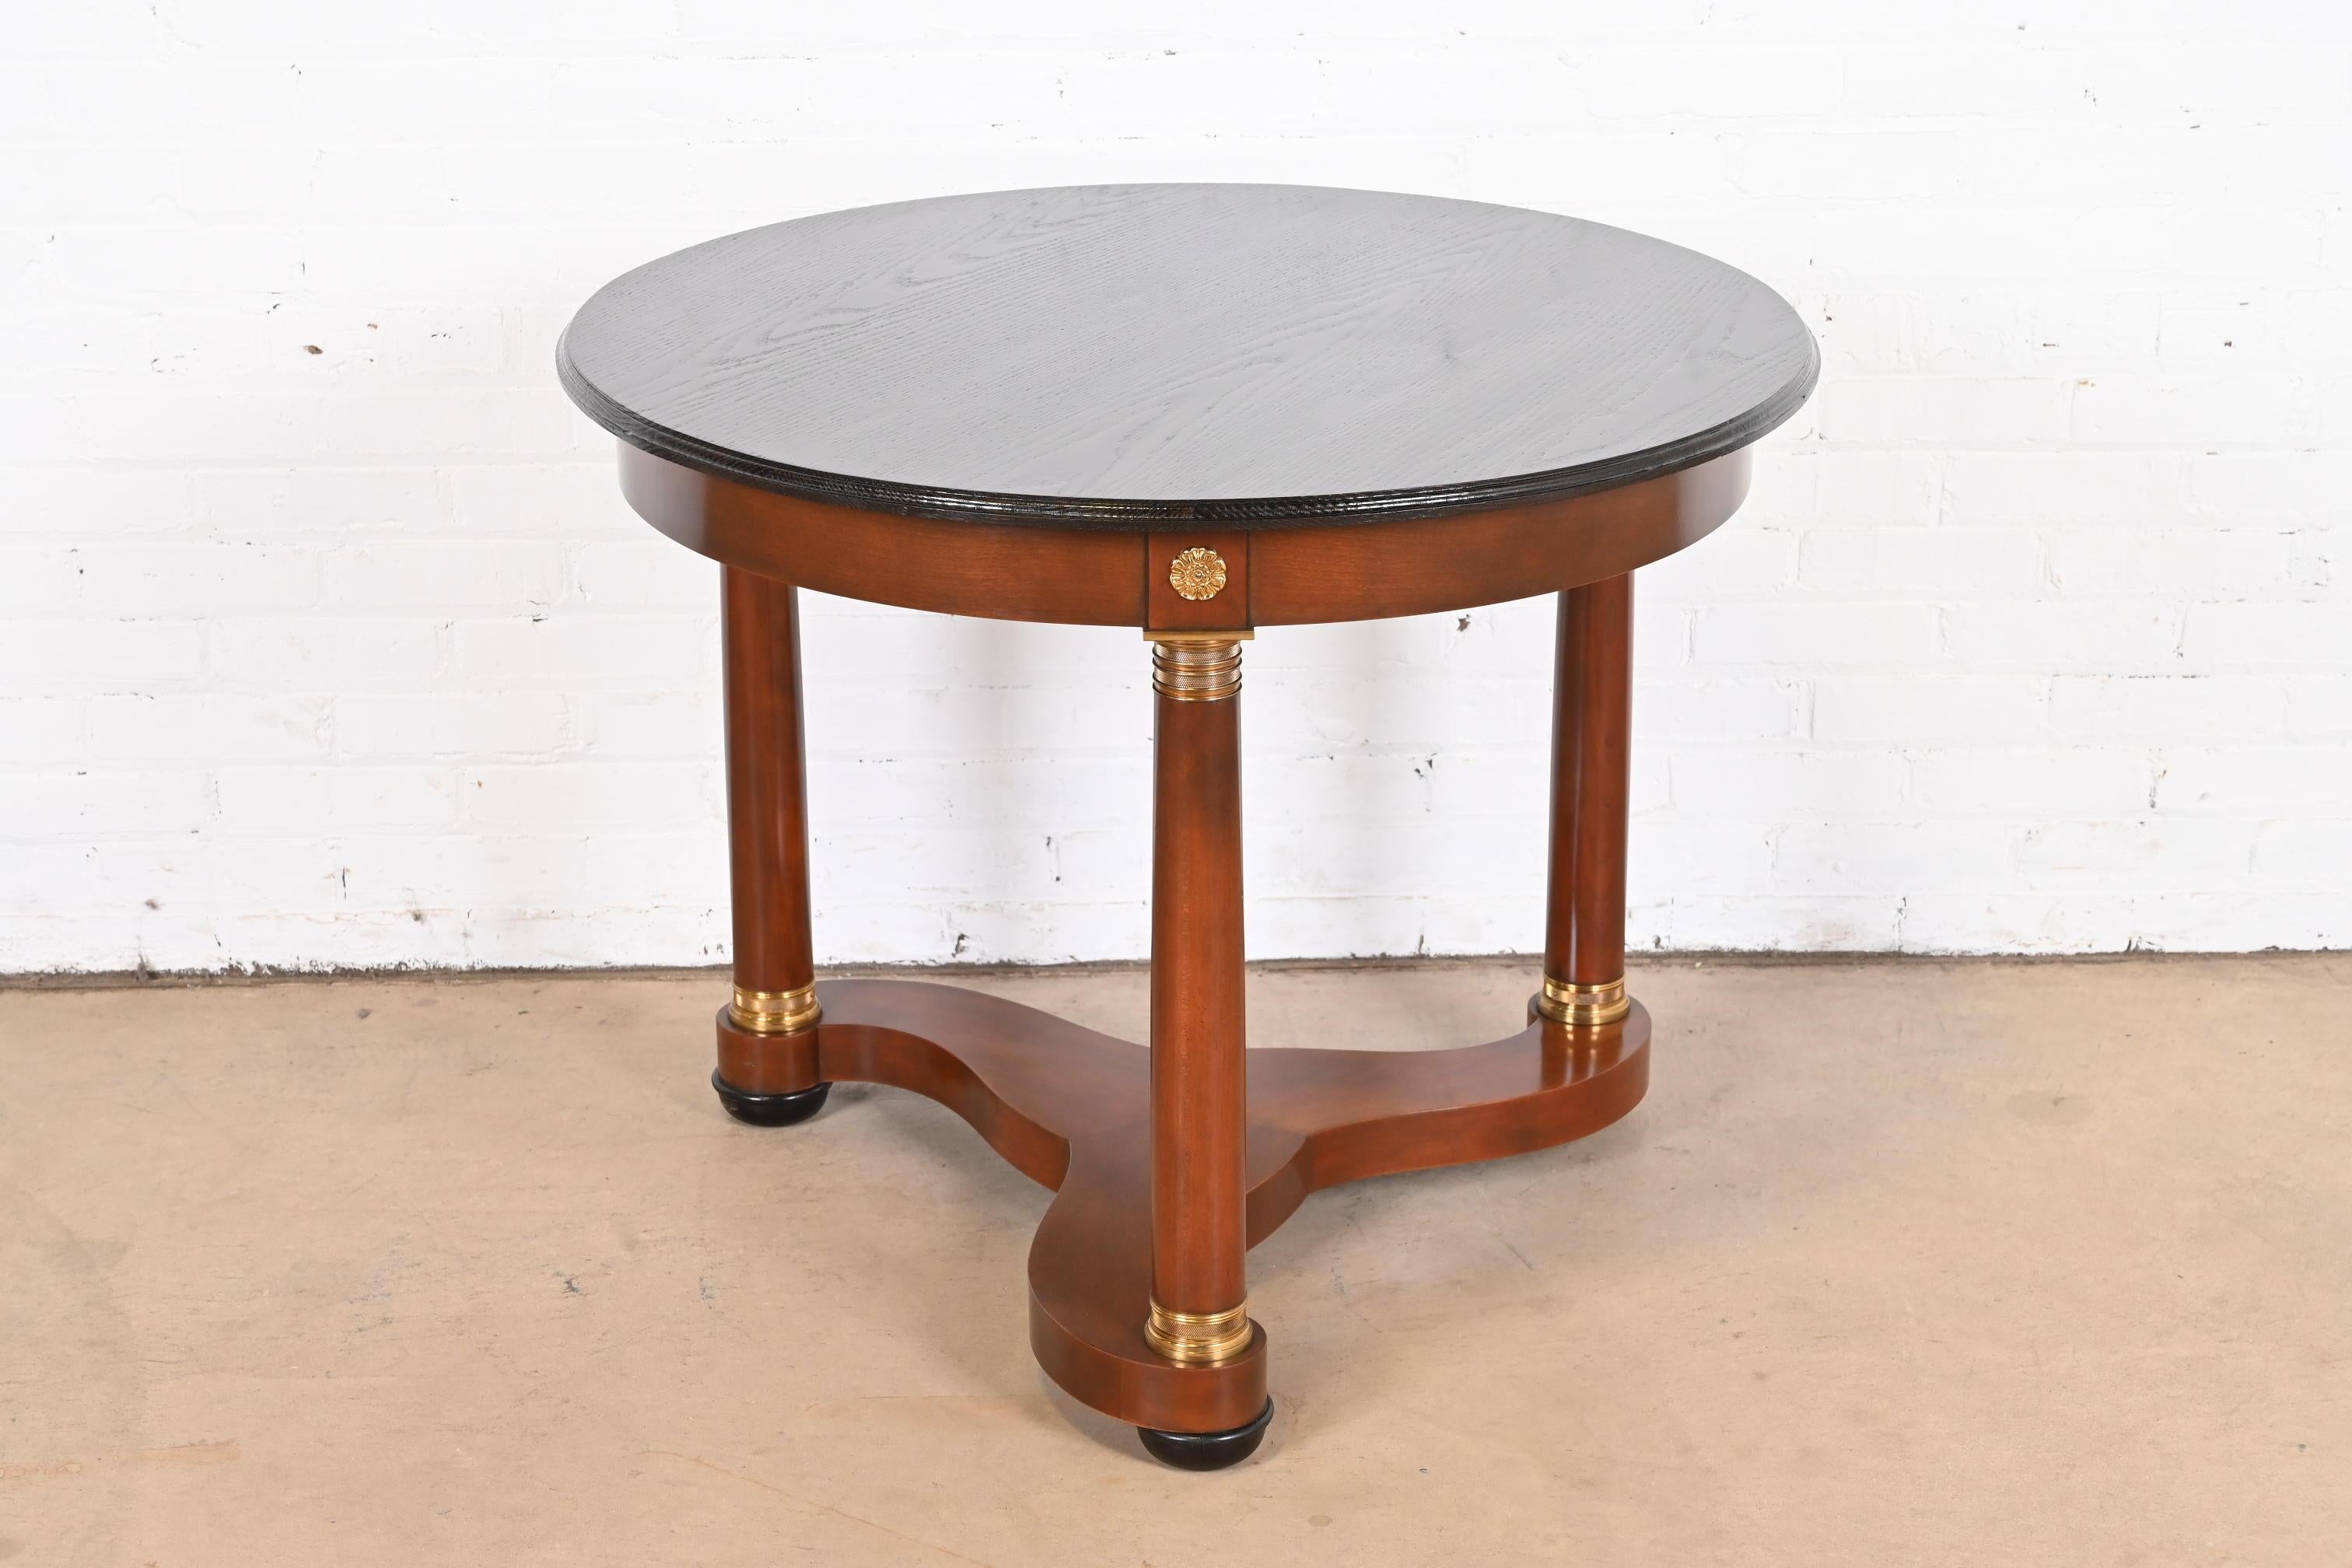 An elegant French Empire or Neoclassical tea table or center table

By Baker Furniture

USA, Late 20th Century

Cherry wood base, with mounted brass accents, and ebonized wood top.

Measures: 36.38